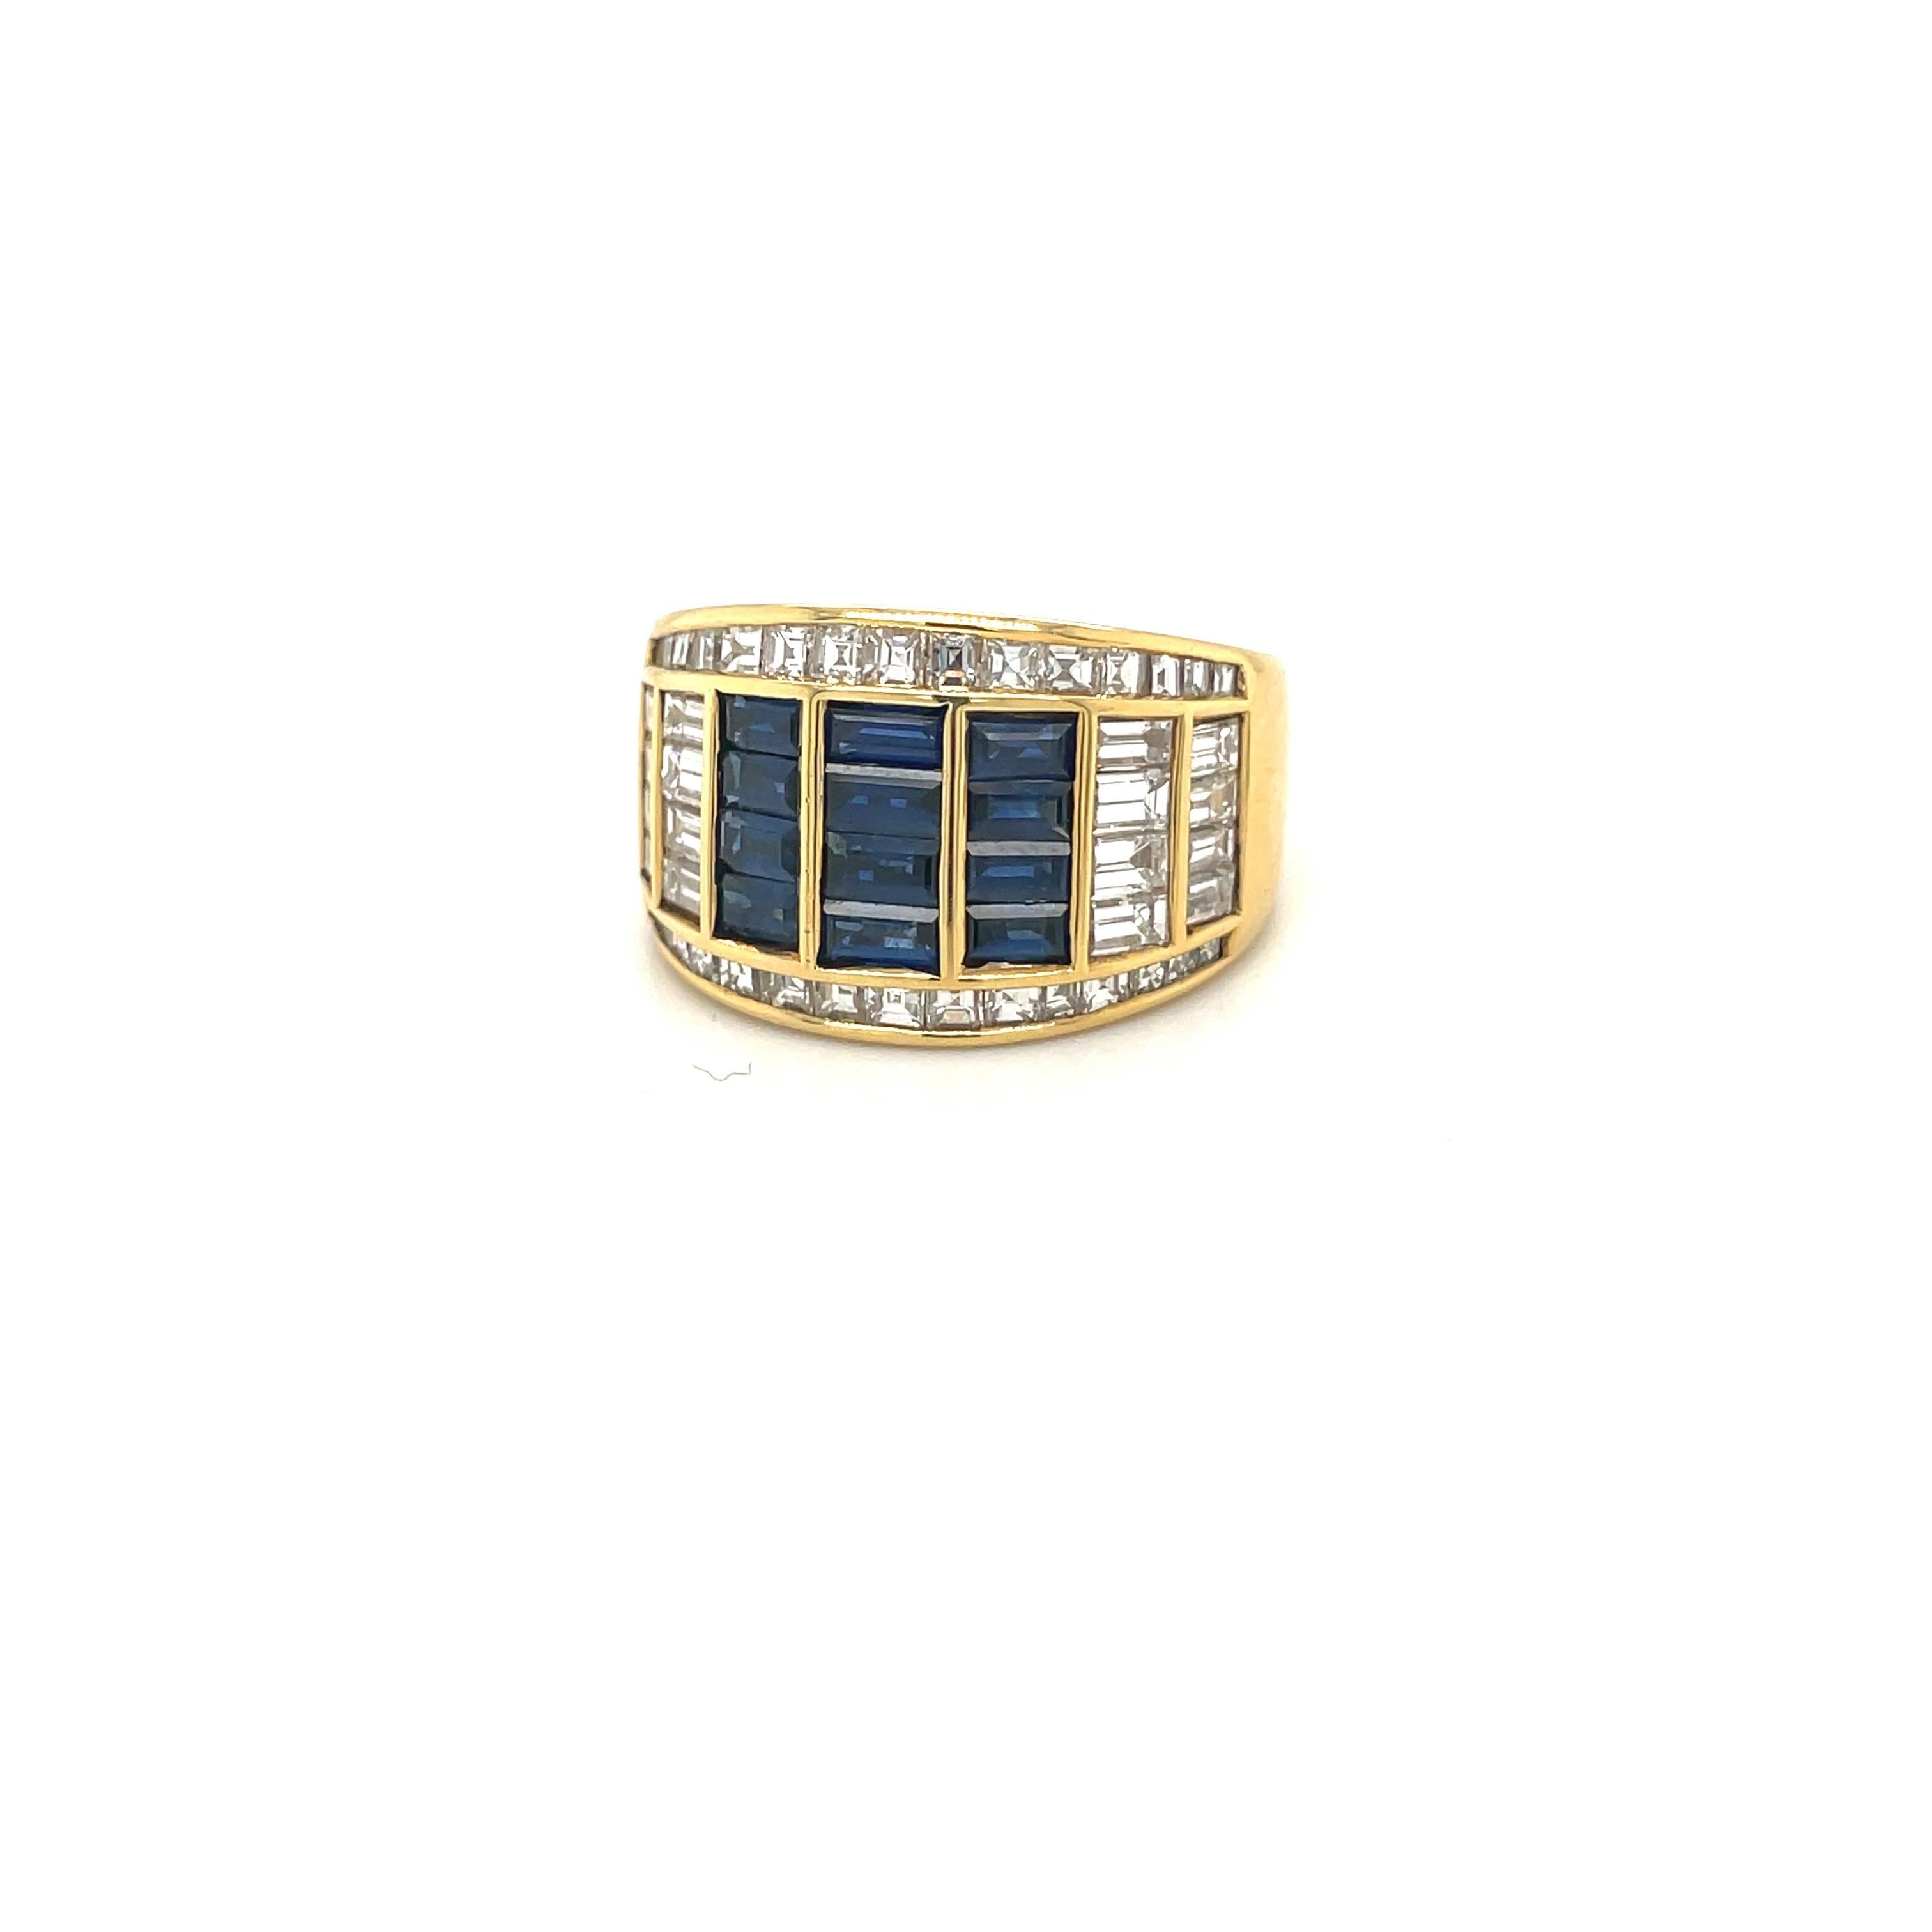 Contemporary Picchiotti 18KT Yellow Gold 2.14Ct Diamond & 1.68Ct Blue Sapphire Band Ring For Sale